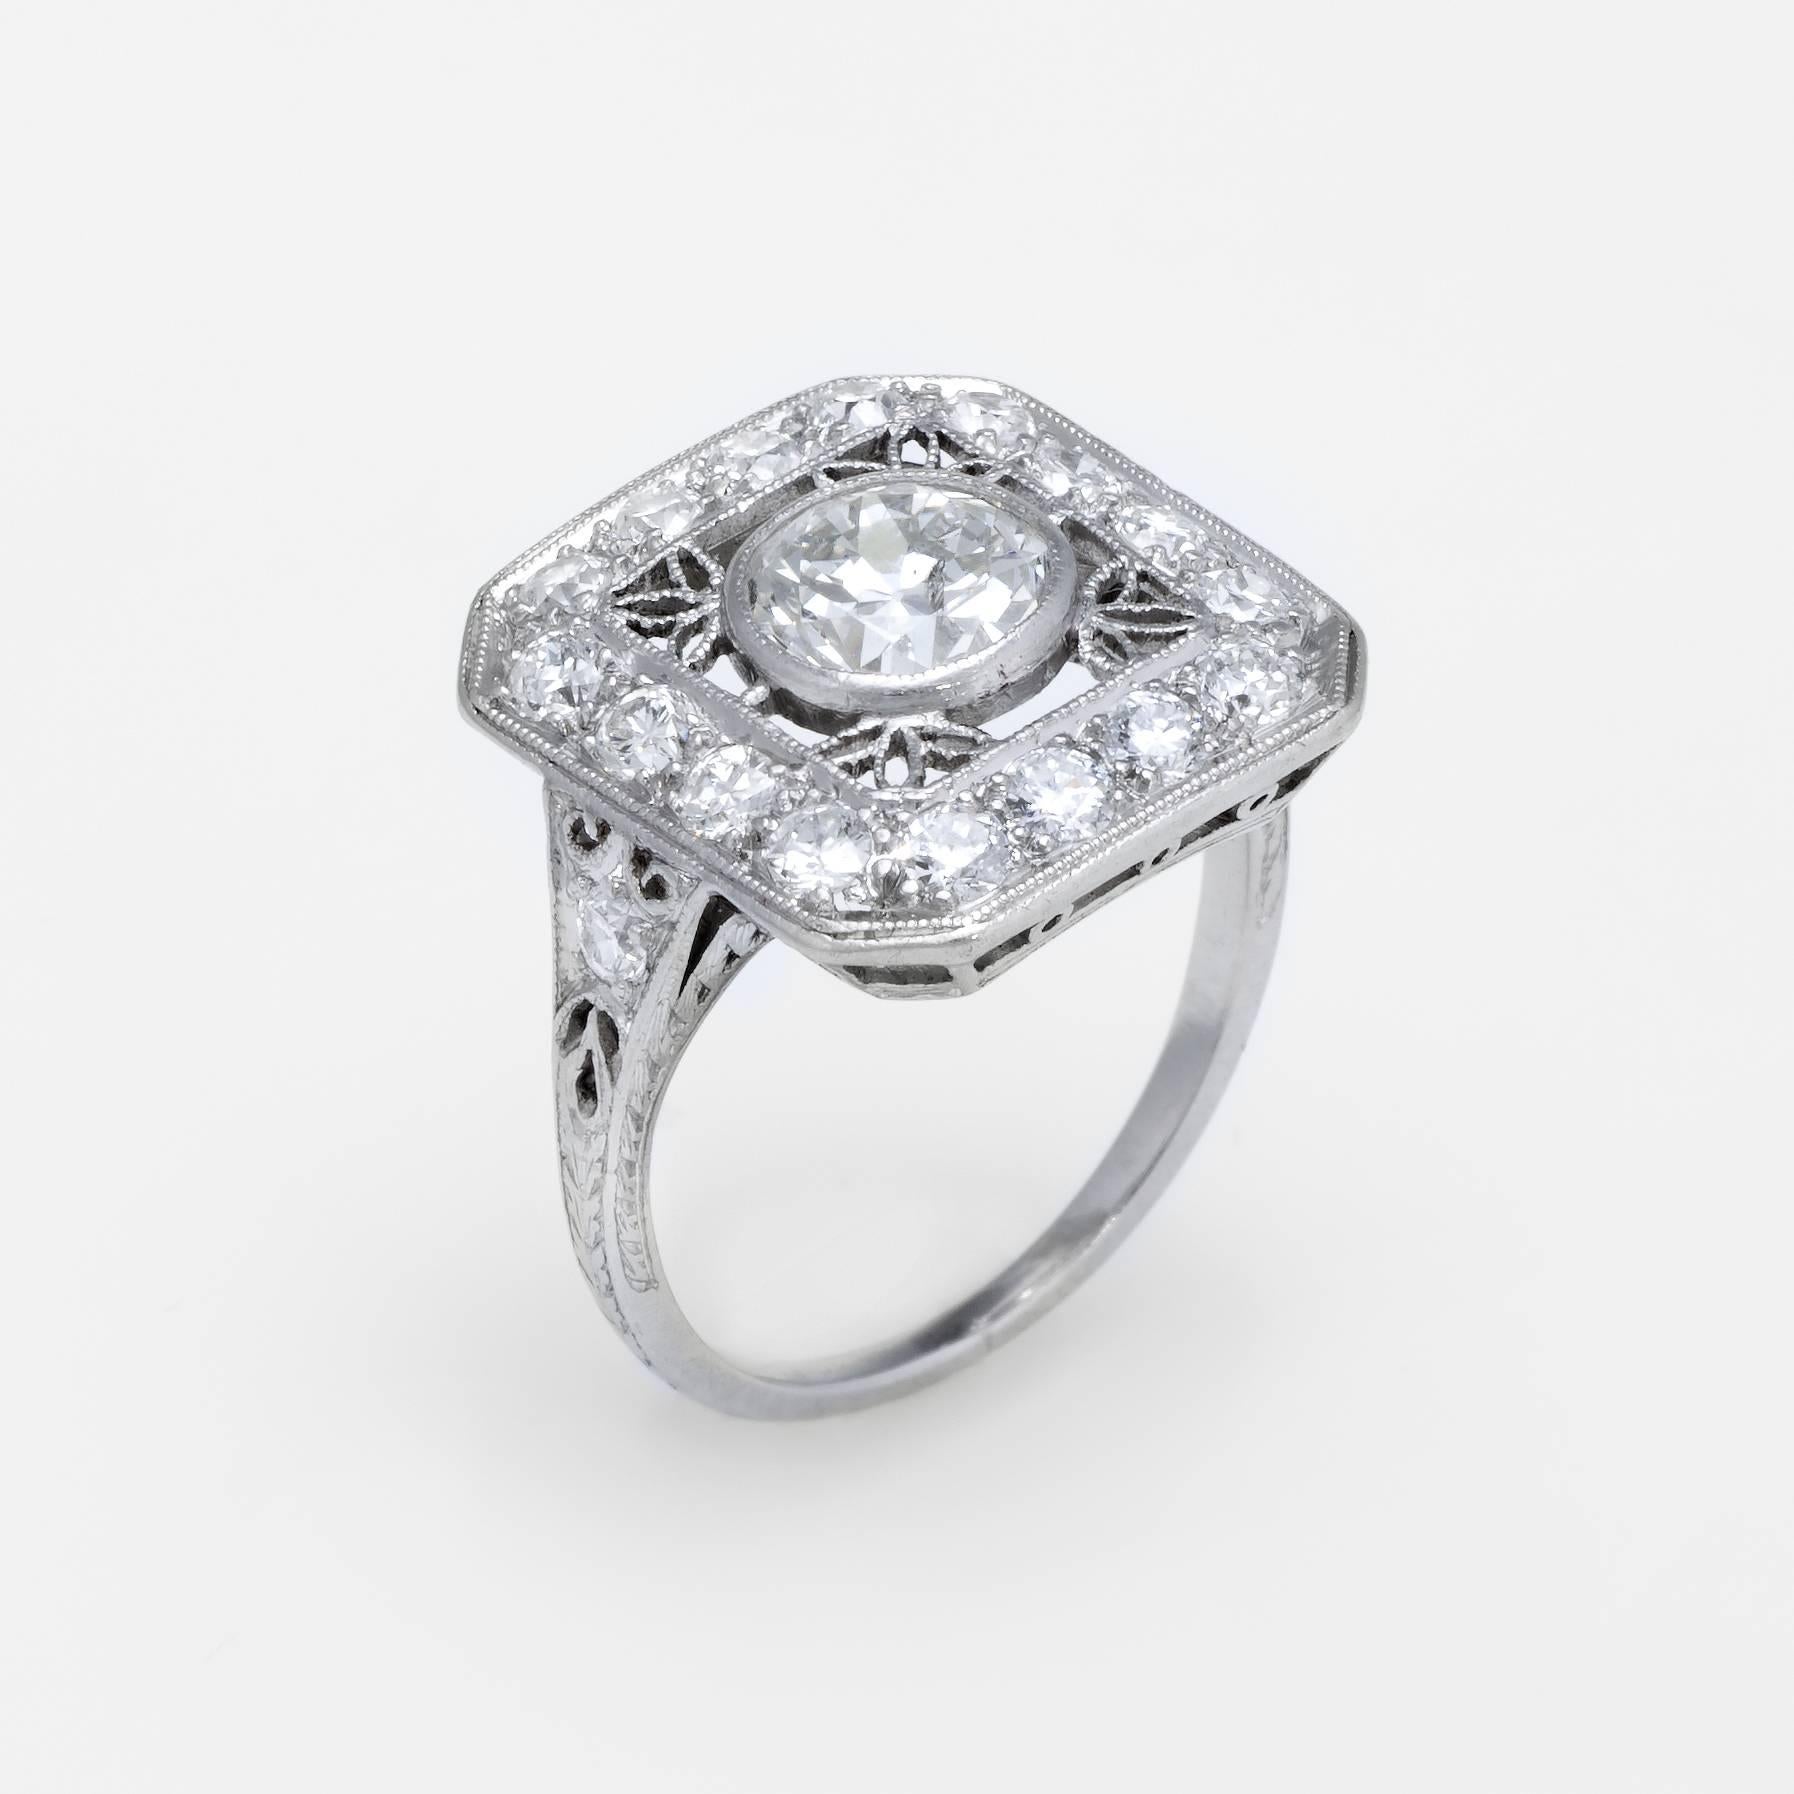 Finely detailed vintage Art Deco era ring (circa 1920s to 1930s), crafted in 900 platinum. 

Centrally mounted estimated 0.75 carat old European cut diamond is accented with 18 x 0.04 carat (estimated) old European cut diamonds. 
The total diamond